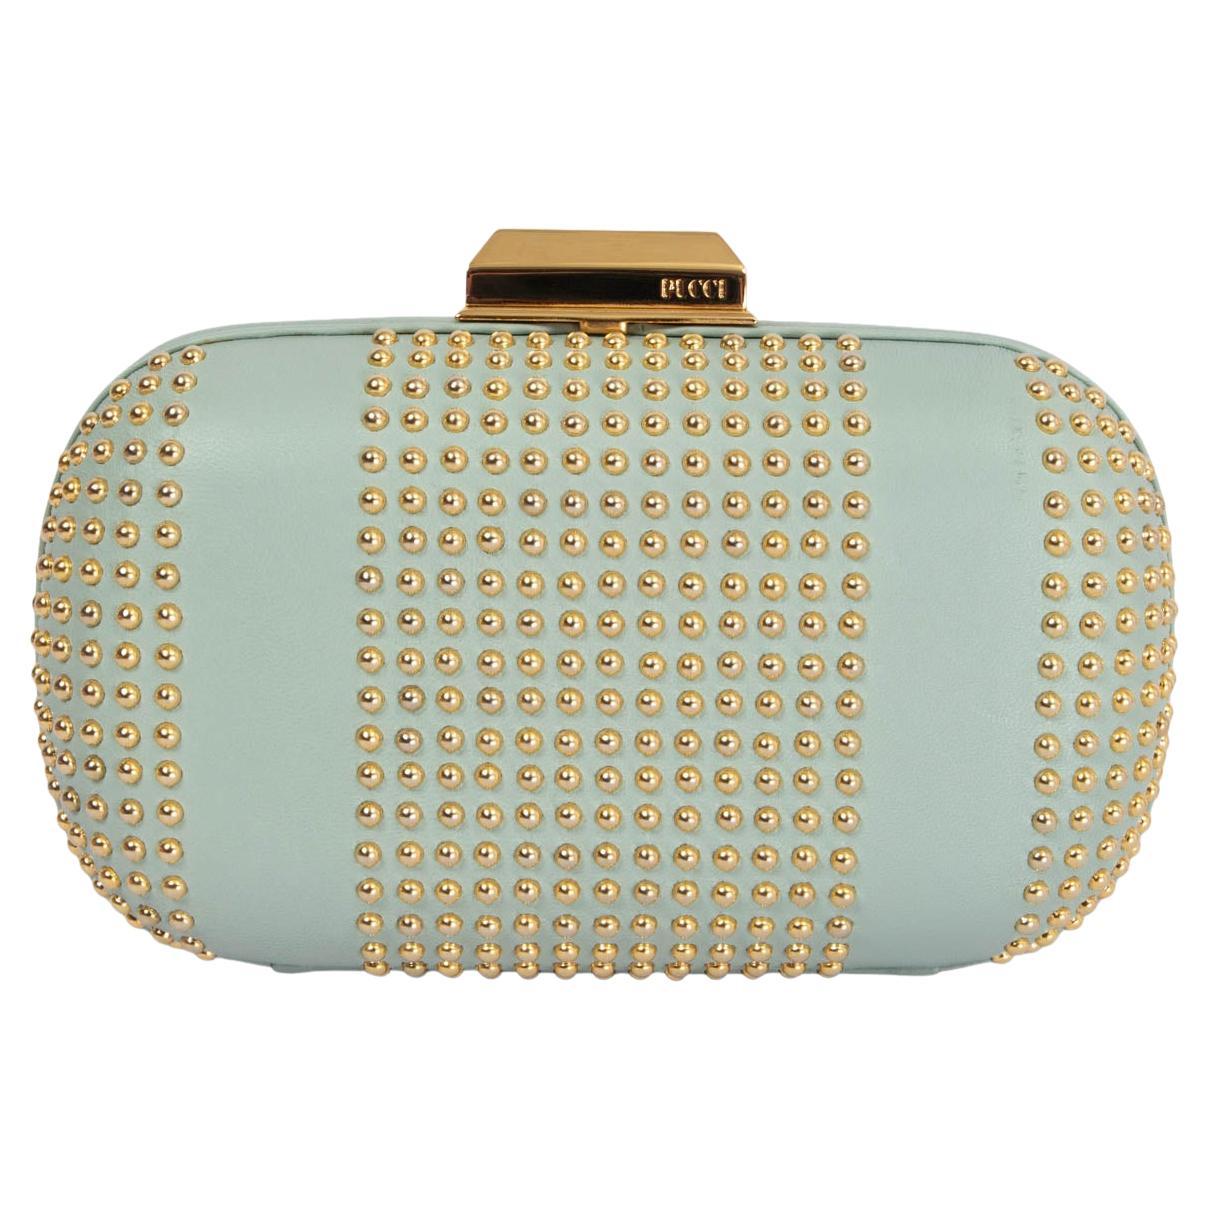 EMILIO PUCCI minor green leather STUDDED BOX Clutch Bag For Sale